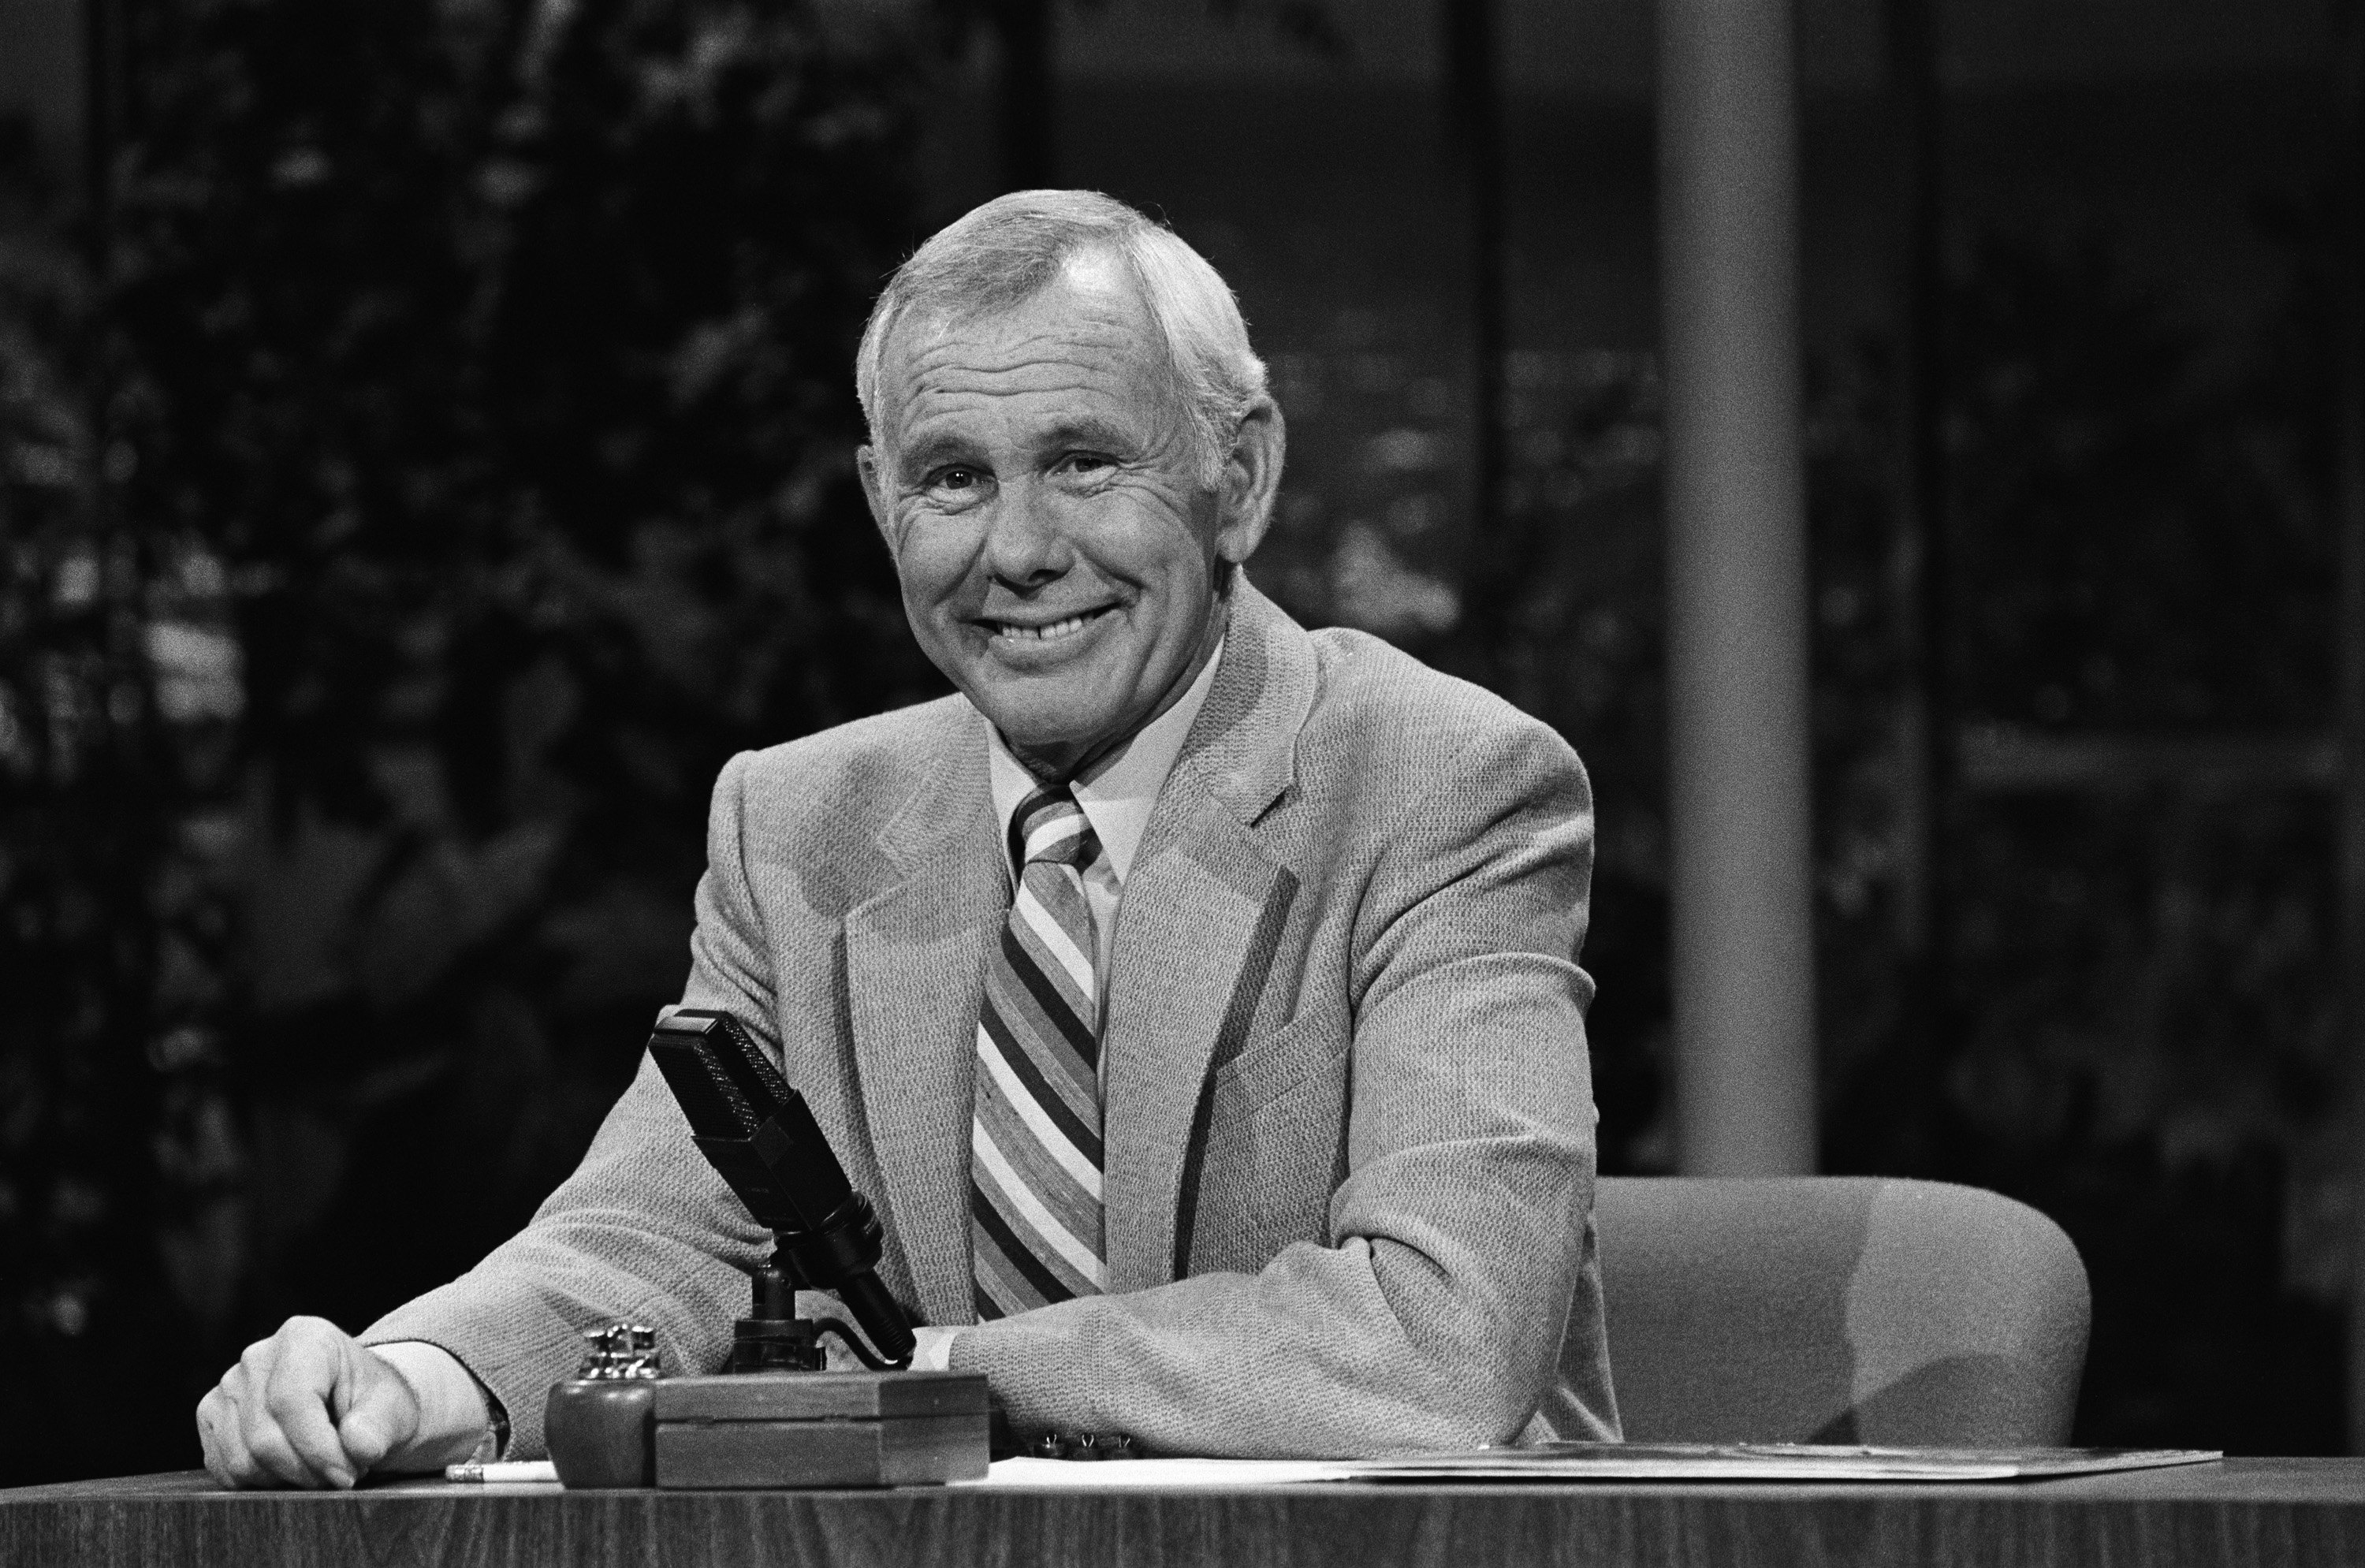 Johnny Carson on air during his show "The Tonight Show Starring Johnny Carson" on July 28, 1982. | Source: Getty Images